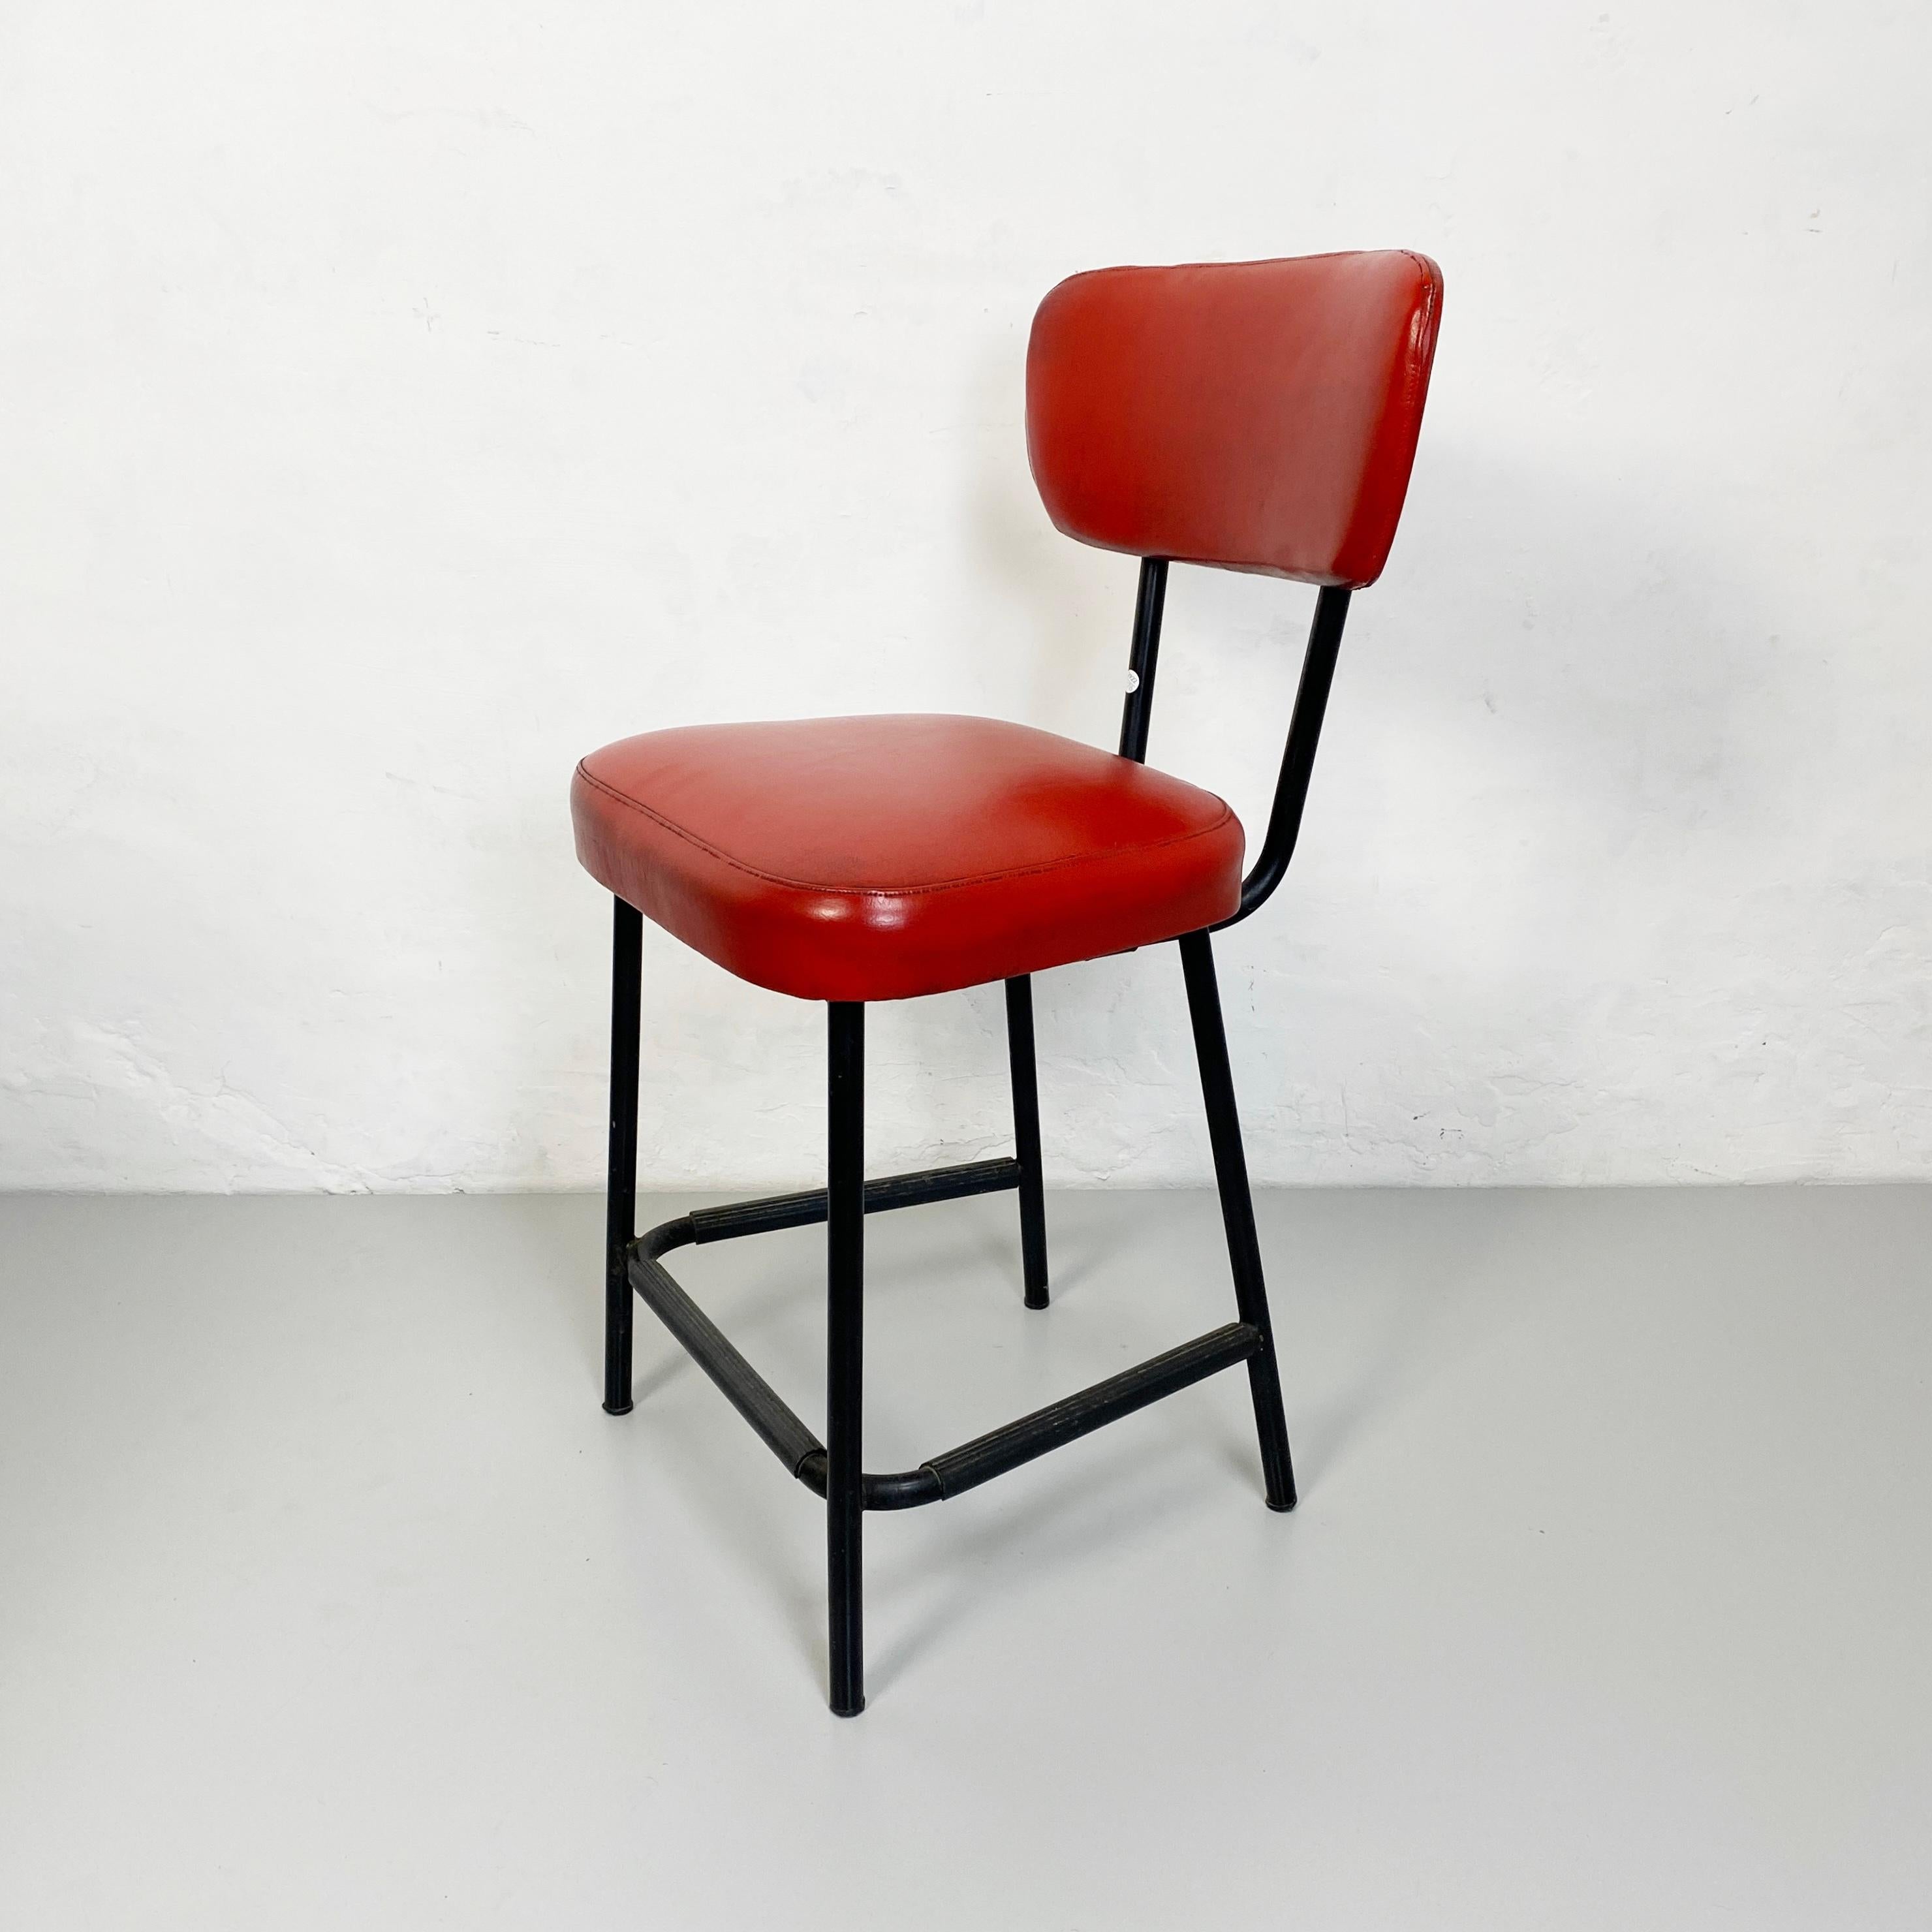 Mid-20th Century Italian Mid-Century Red Sky and Metal Chair, 1960s